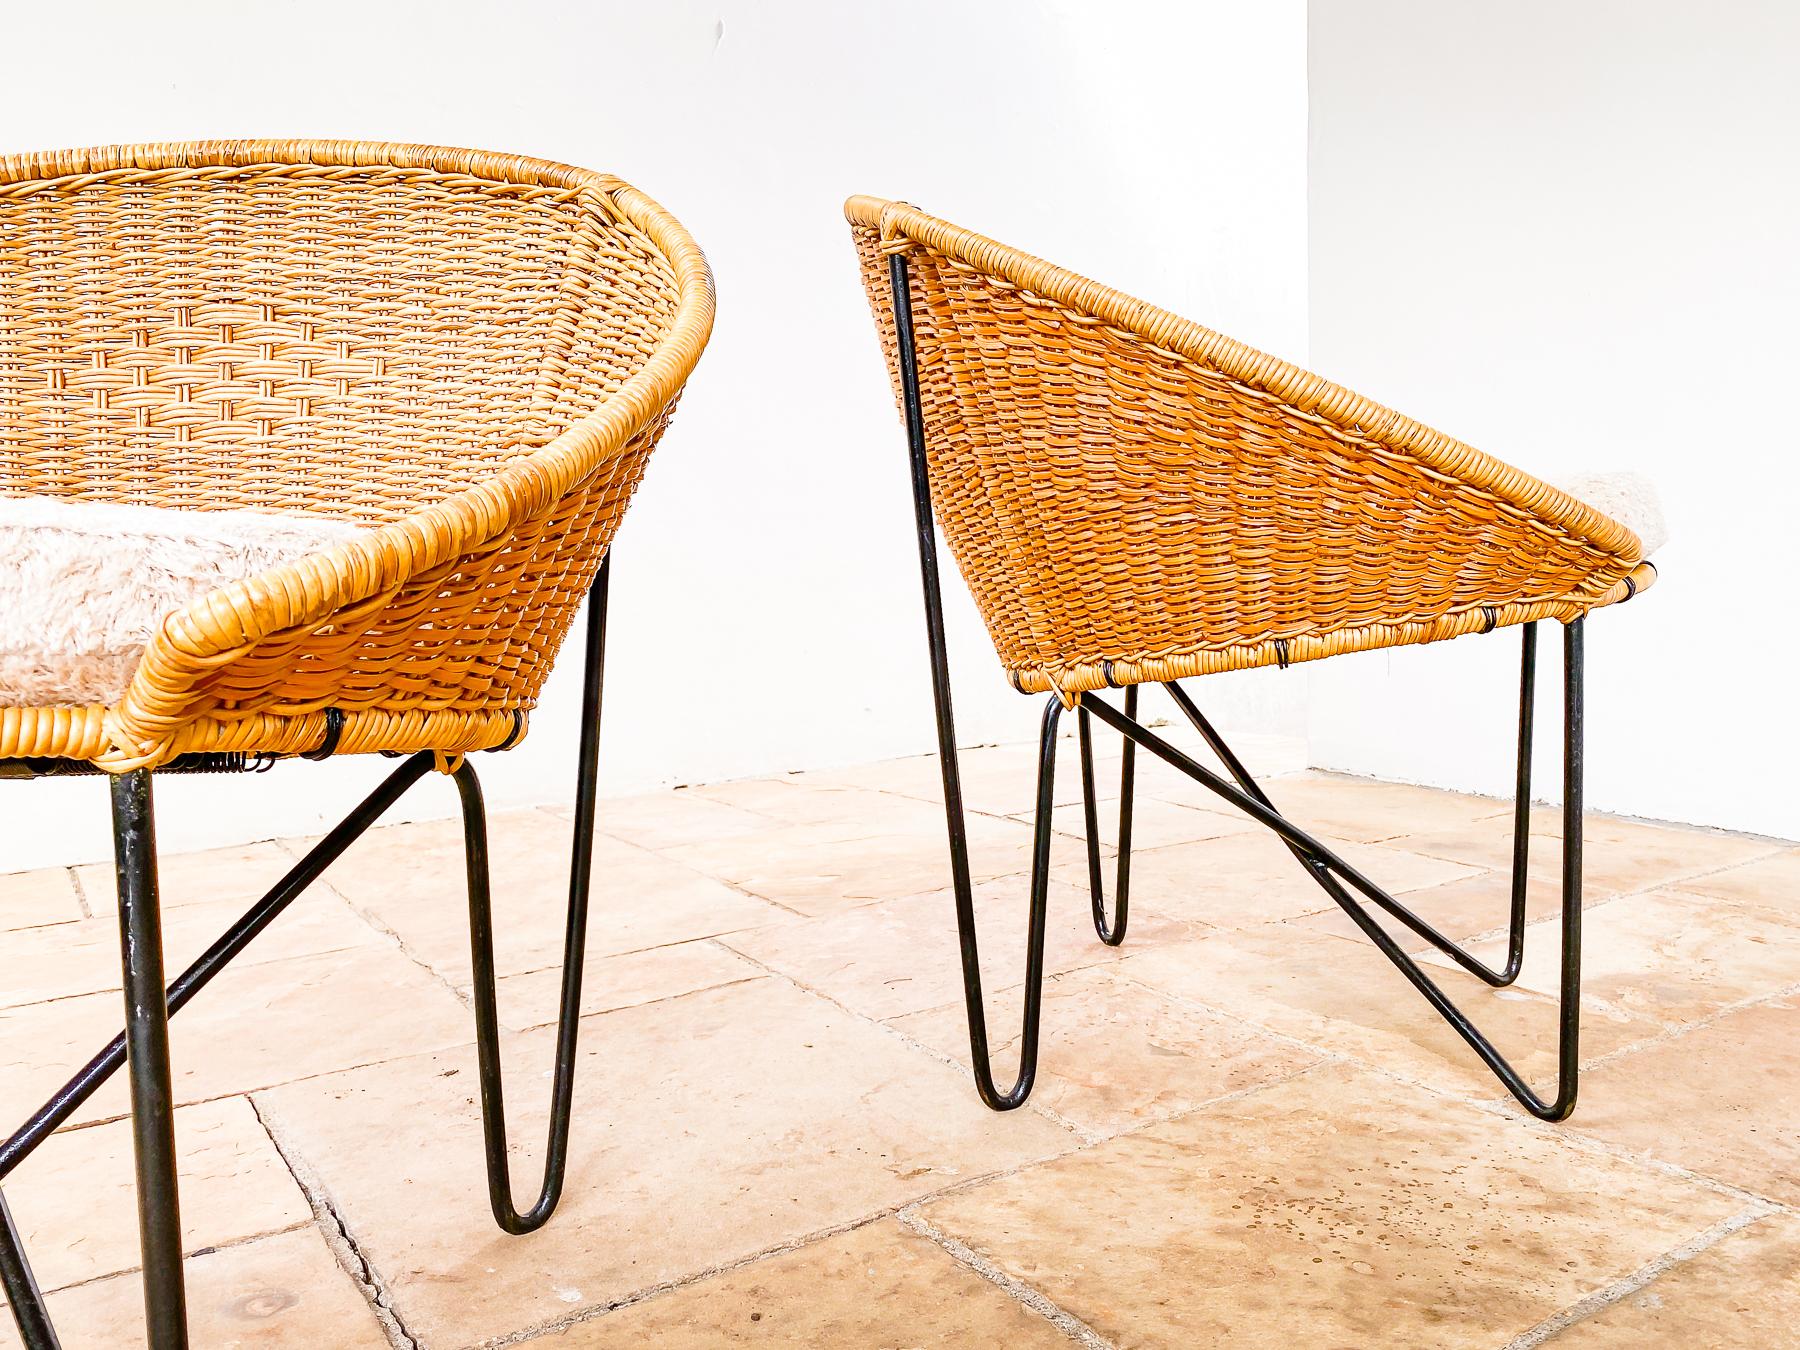 20th Century Brazilian Modern Pair of Lounge Chairs in Iron and Reed by Zanine Caldas, 1950s